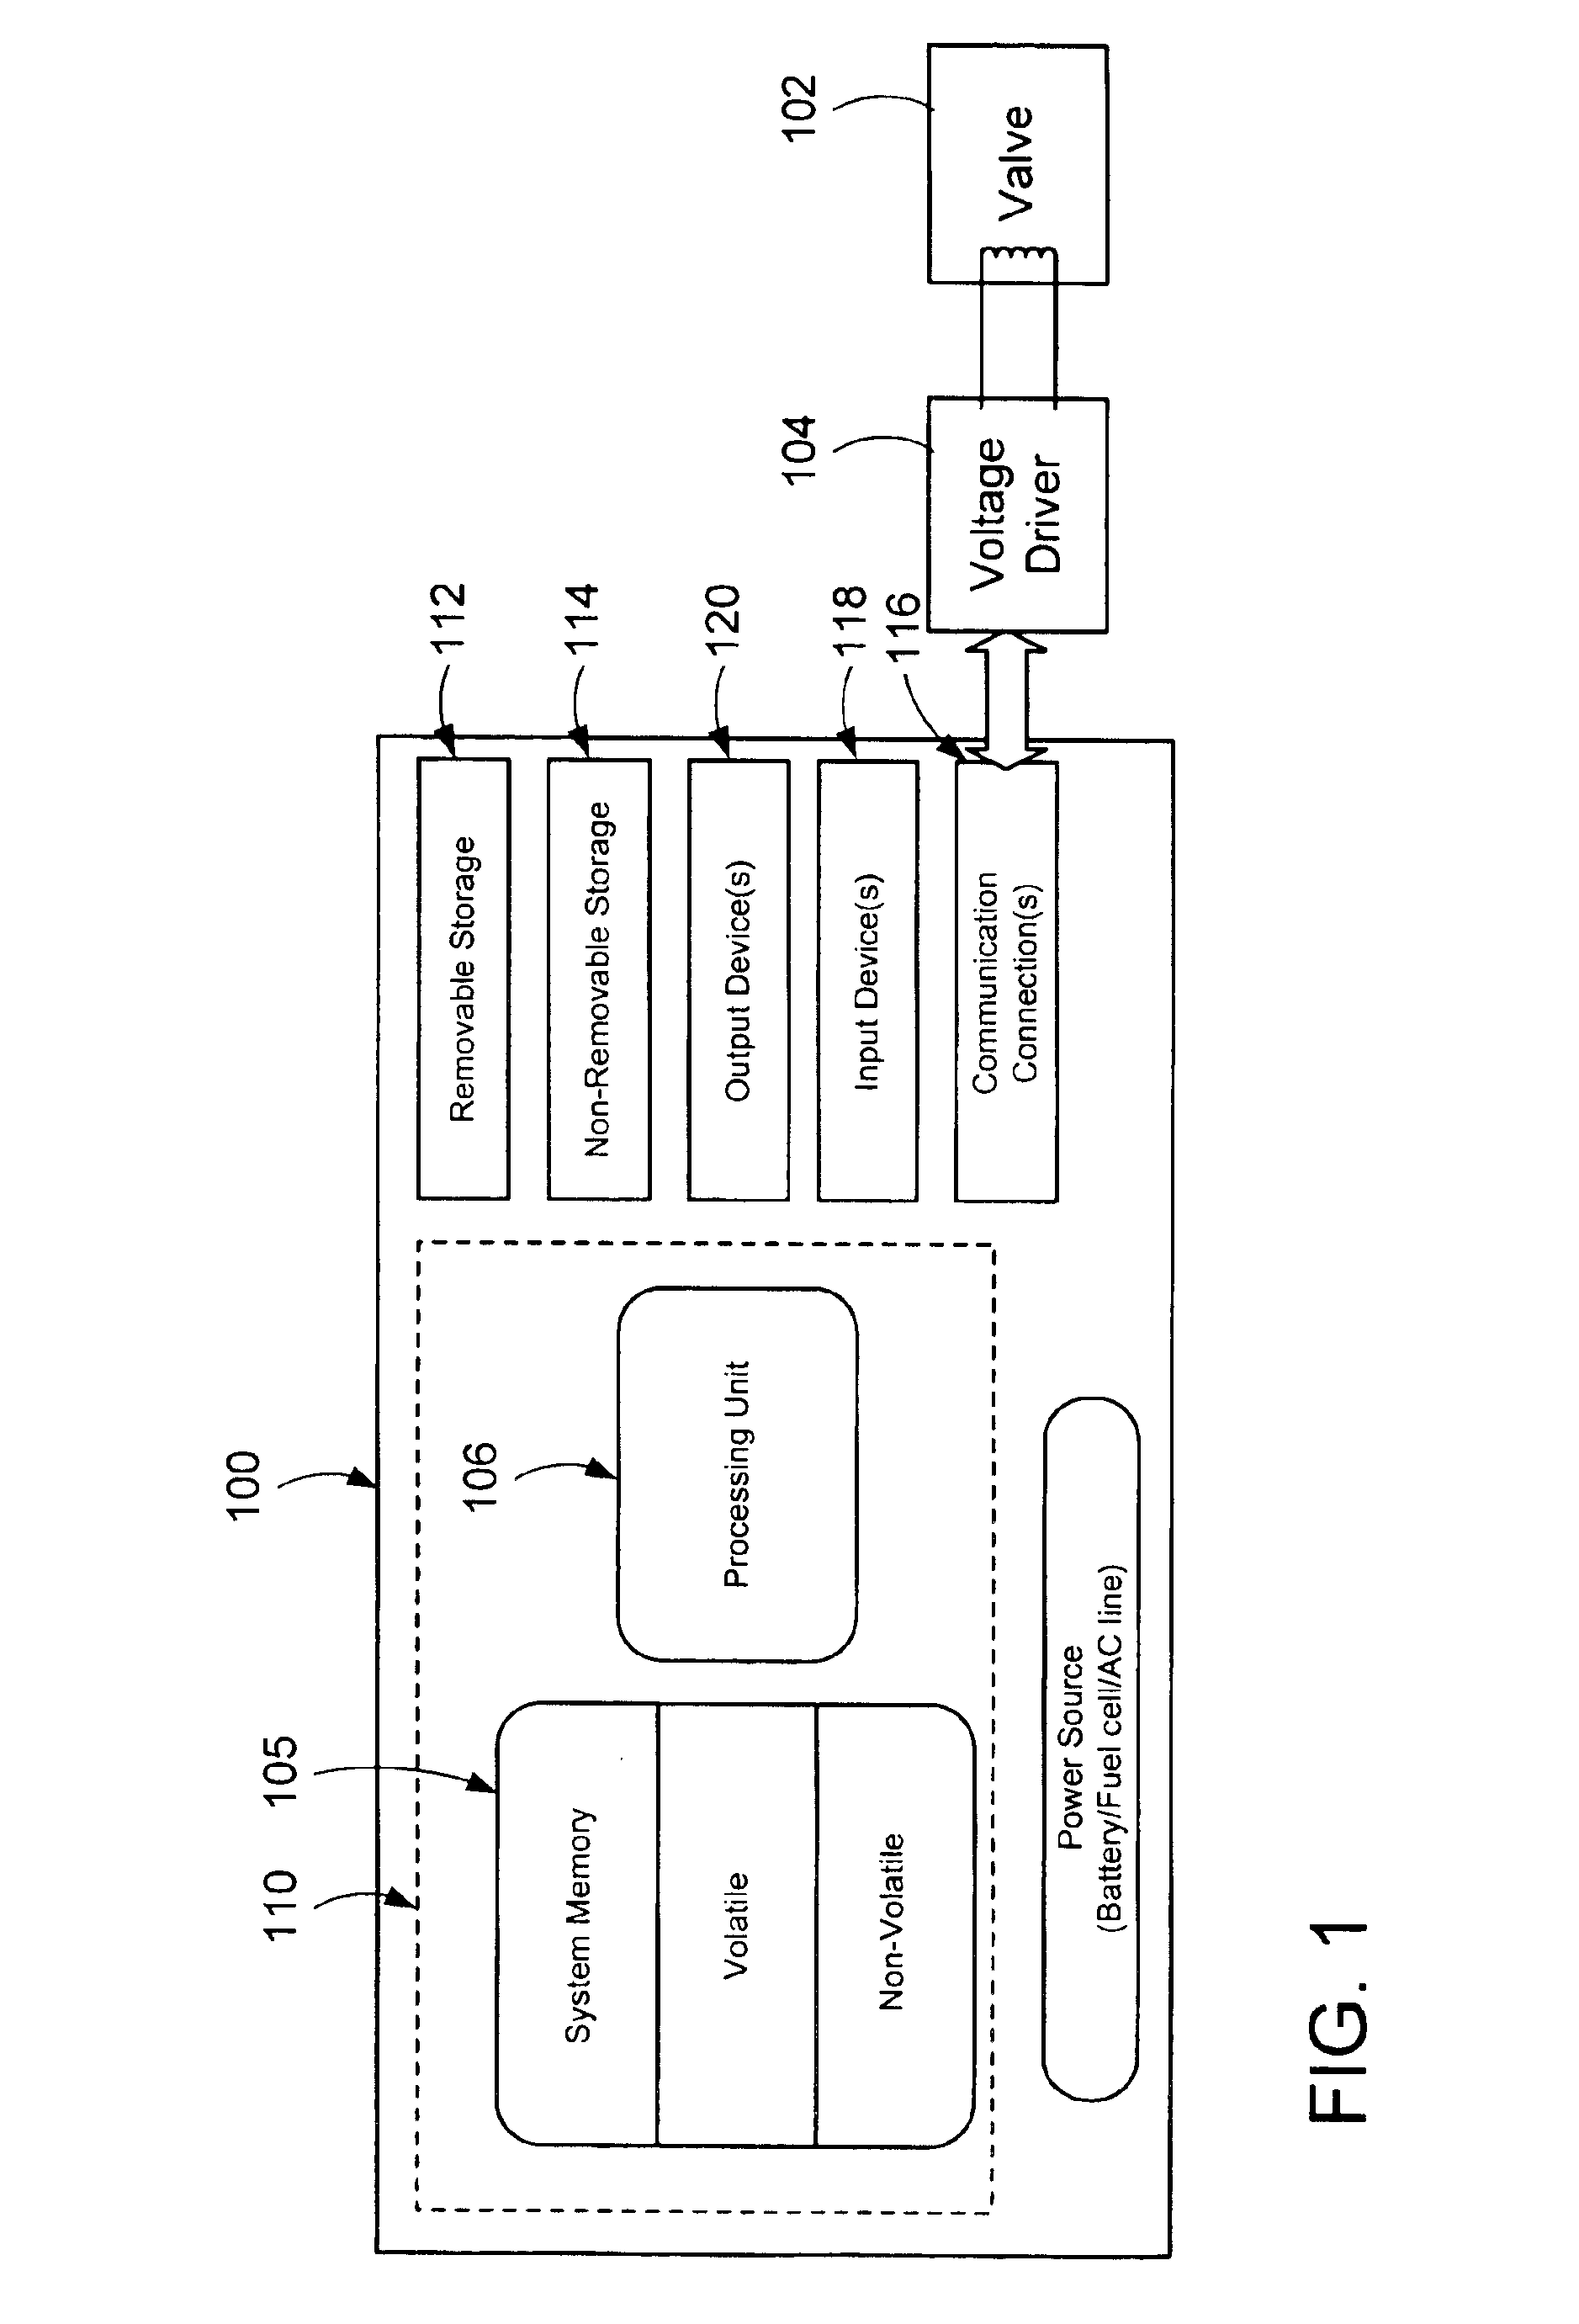 Method to adaptively control and derive the control voltage of solenoid operated valves based on the valve closure point